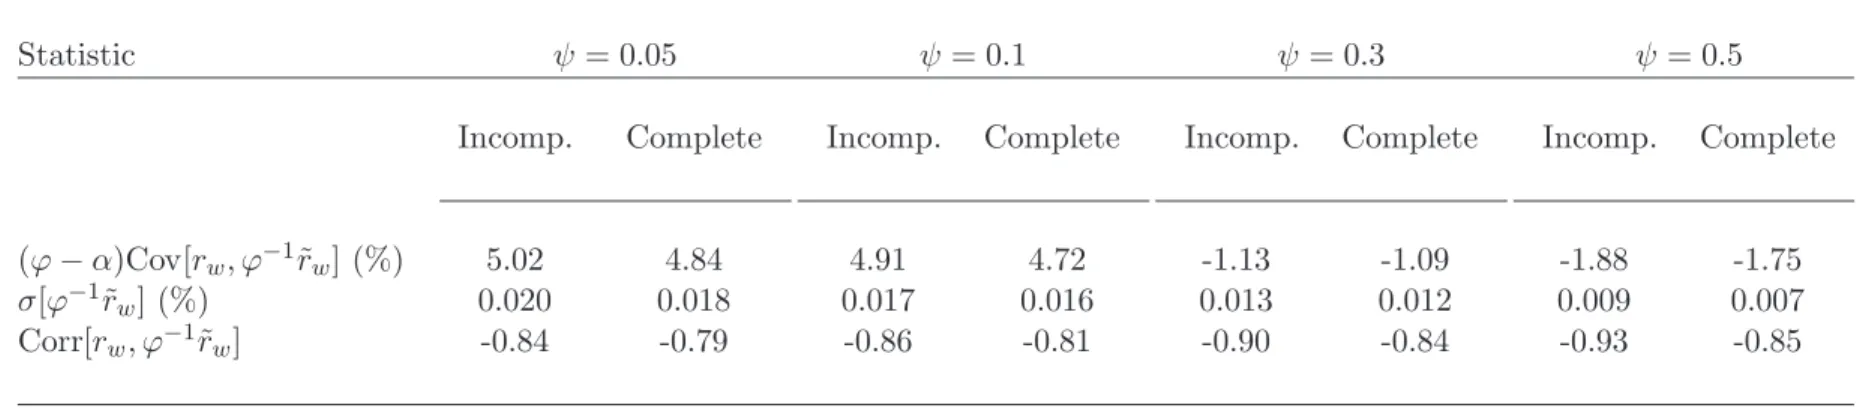 Table 5: The Effects of Incomplete Information on Long-Run Risk in the RBC Model with Temporary Shocks